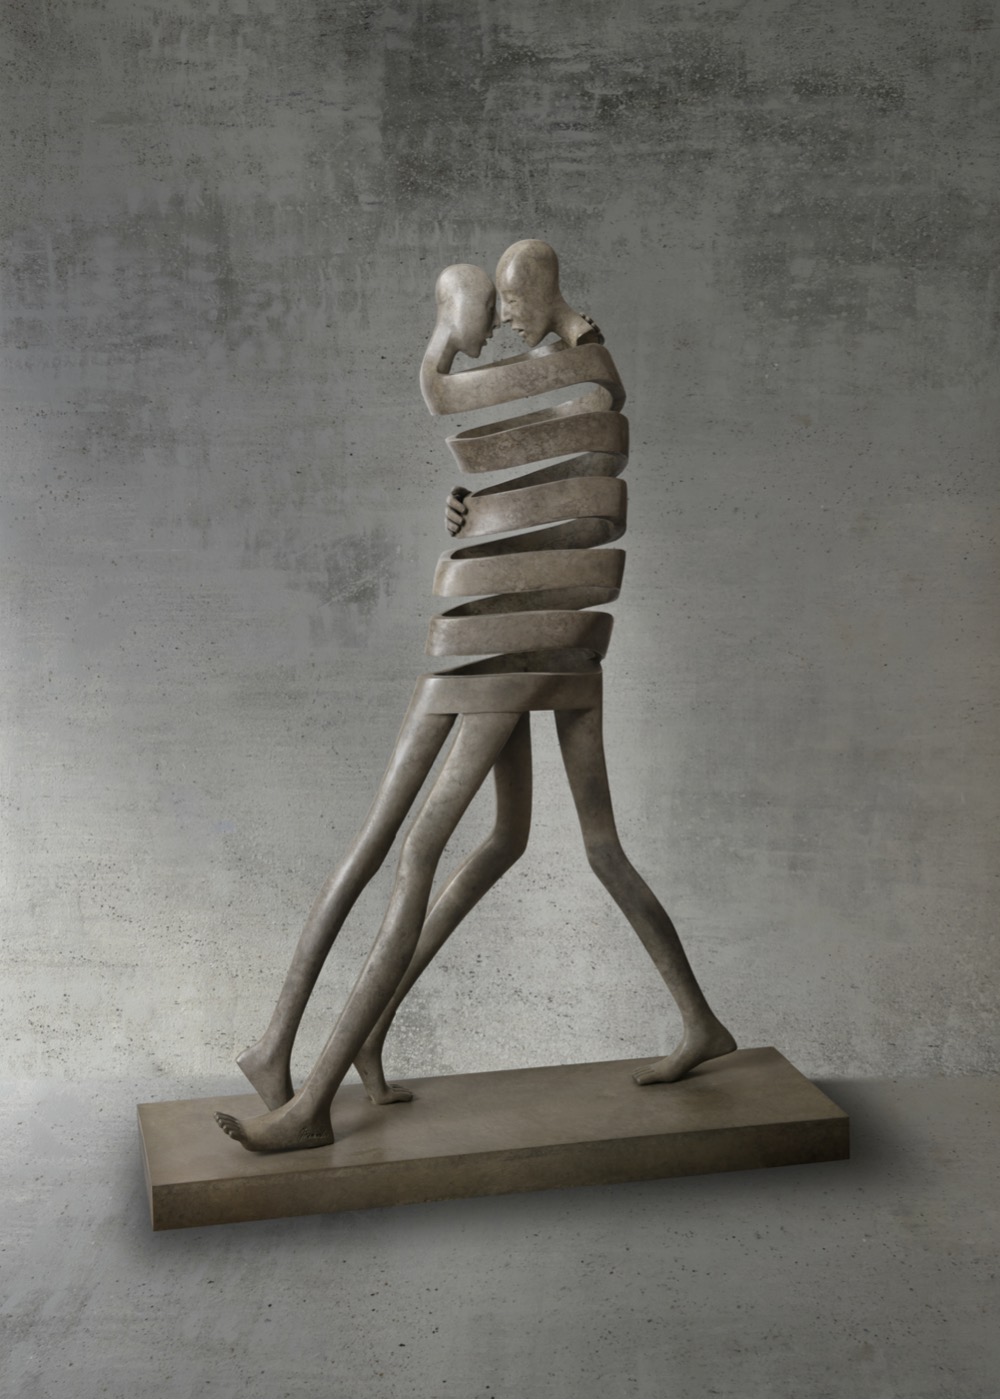 sculpture of two people intertwined in an embrace